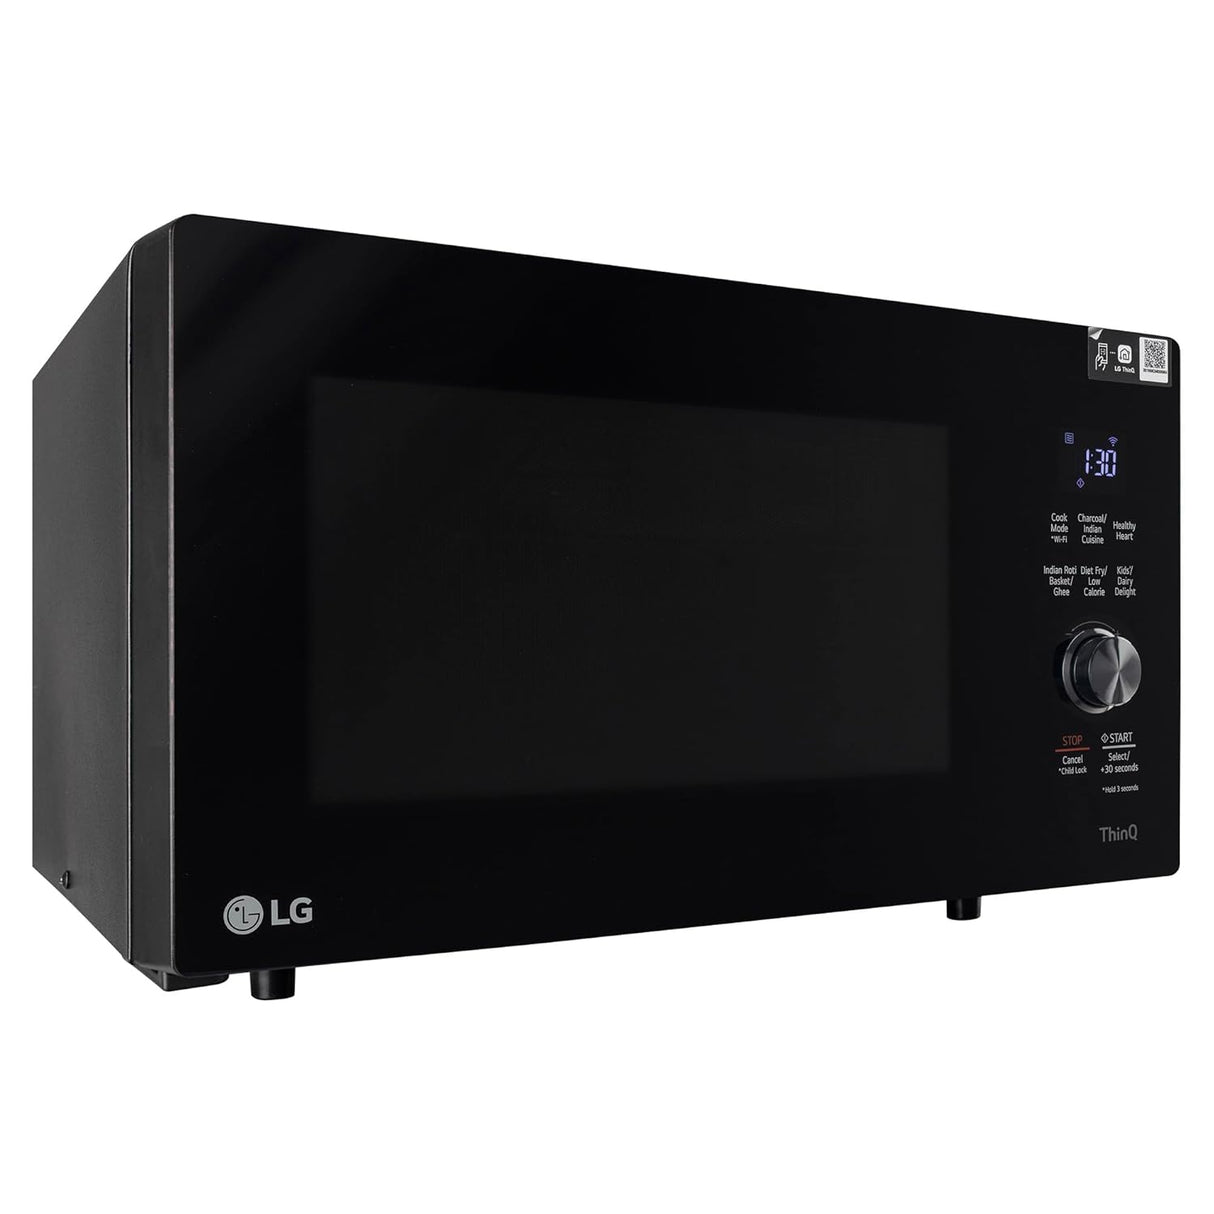 LG 28 L Wi-Fi Enabled Charcoal Convection Healthy Microwave Oven (MJEN286UFW, Black, Diet Fry) - 2023 Model